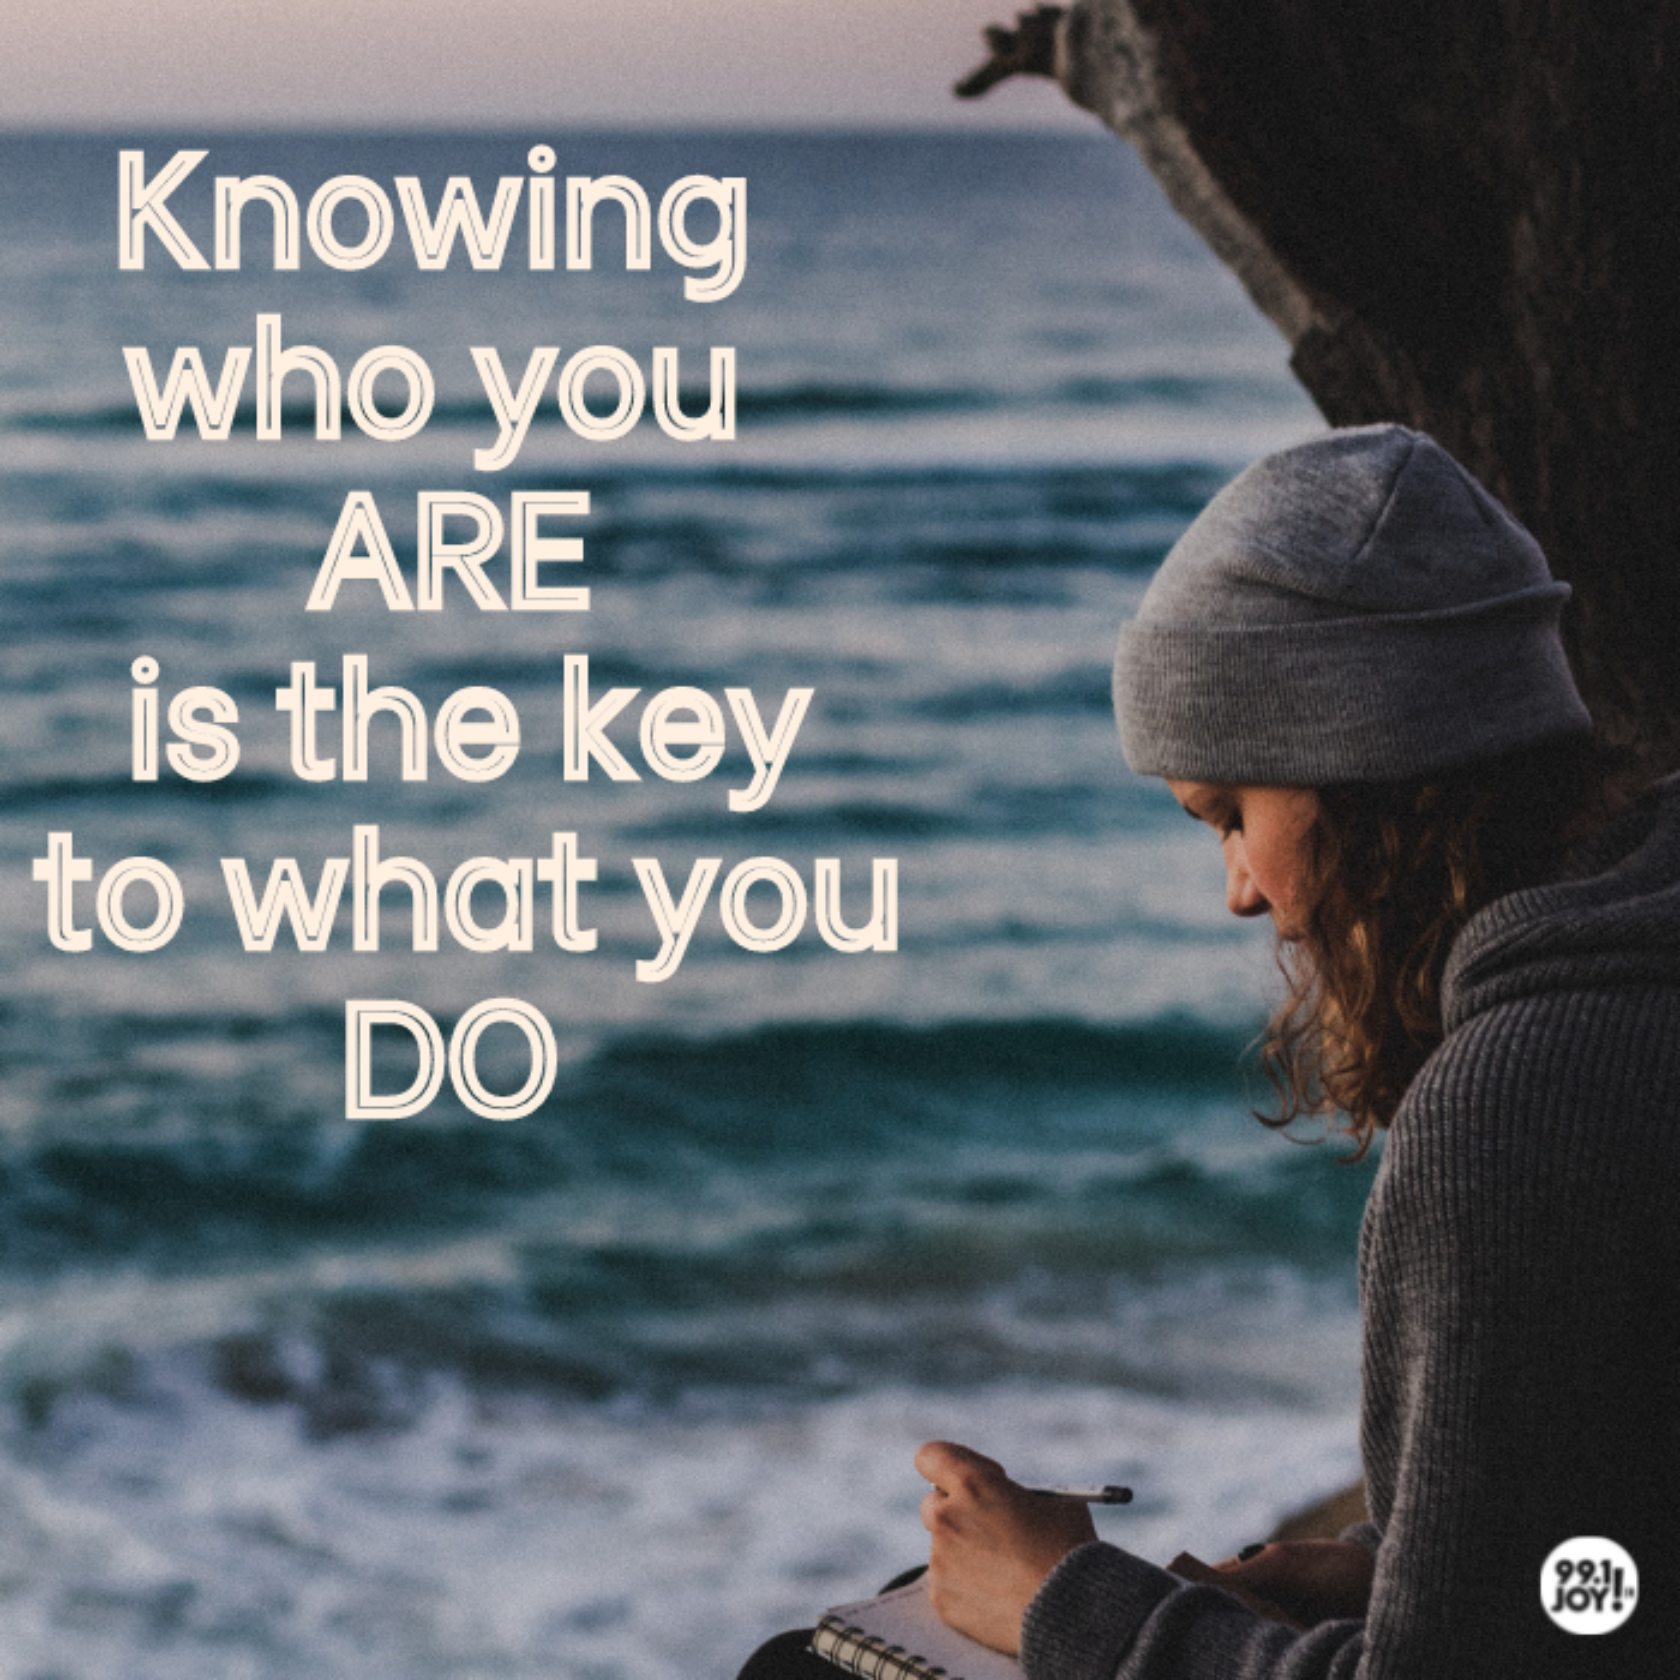 Knowing who you ARE is the key to what you DO